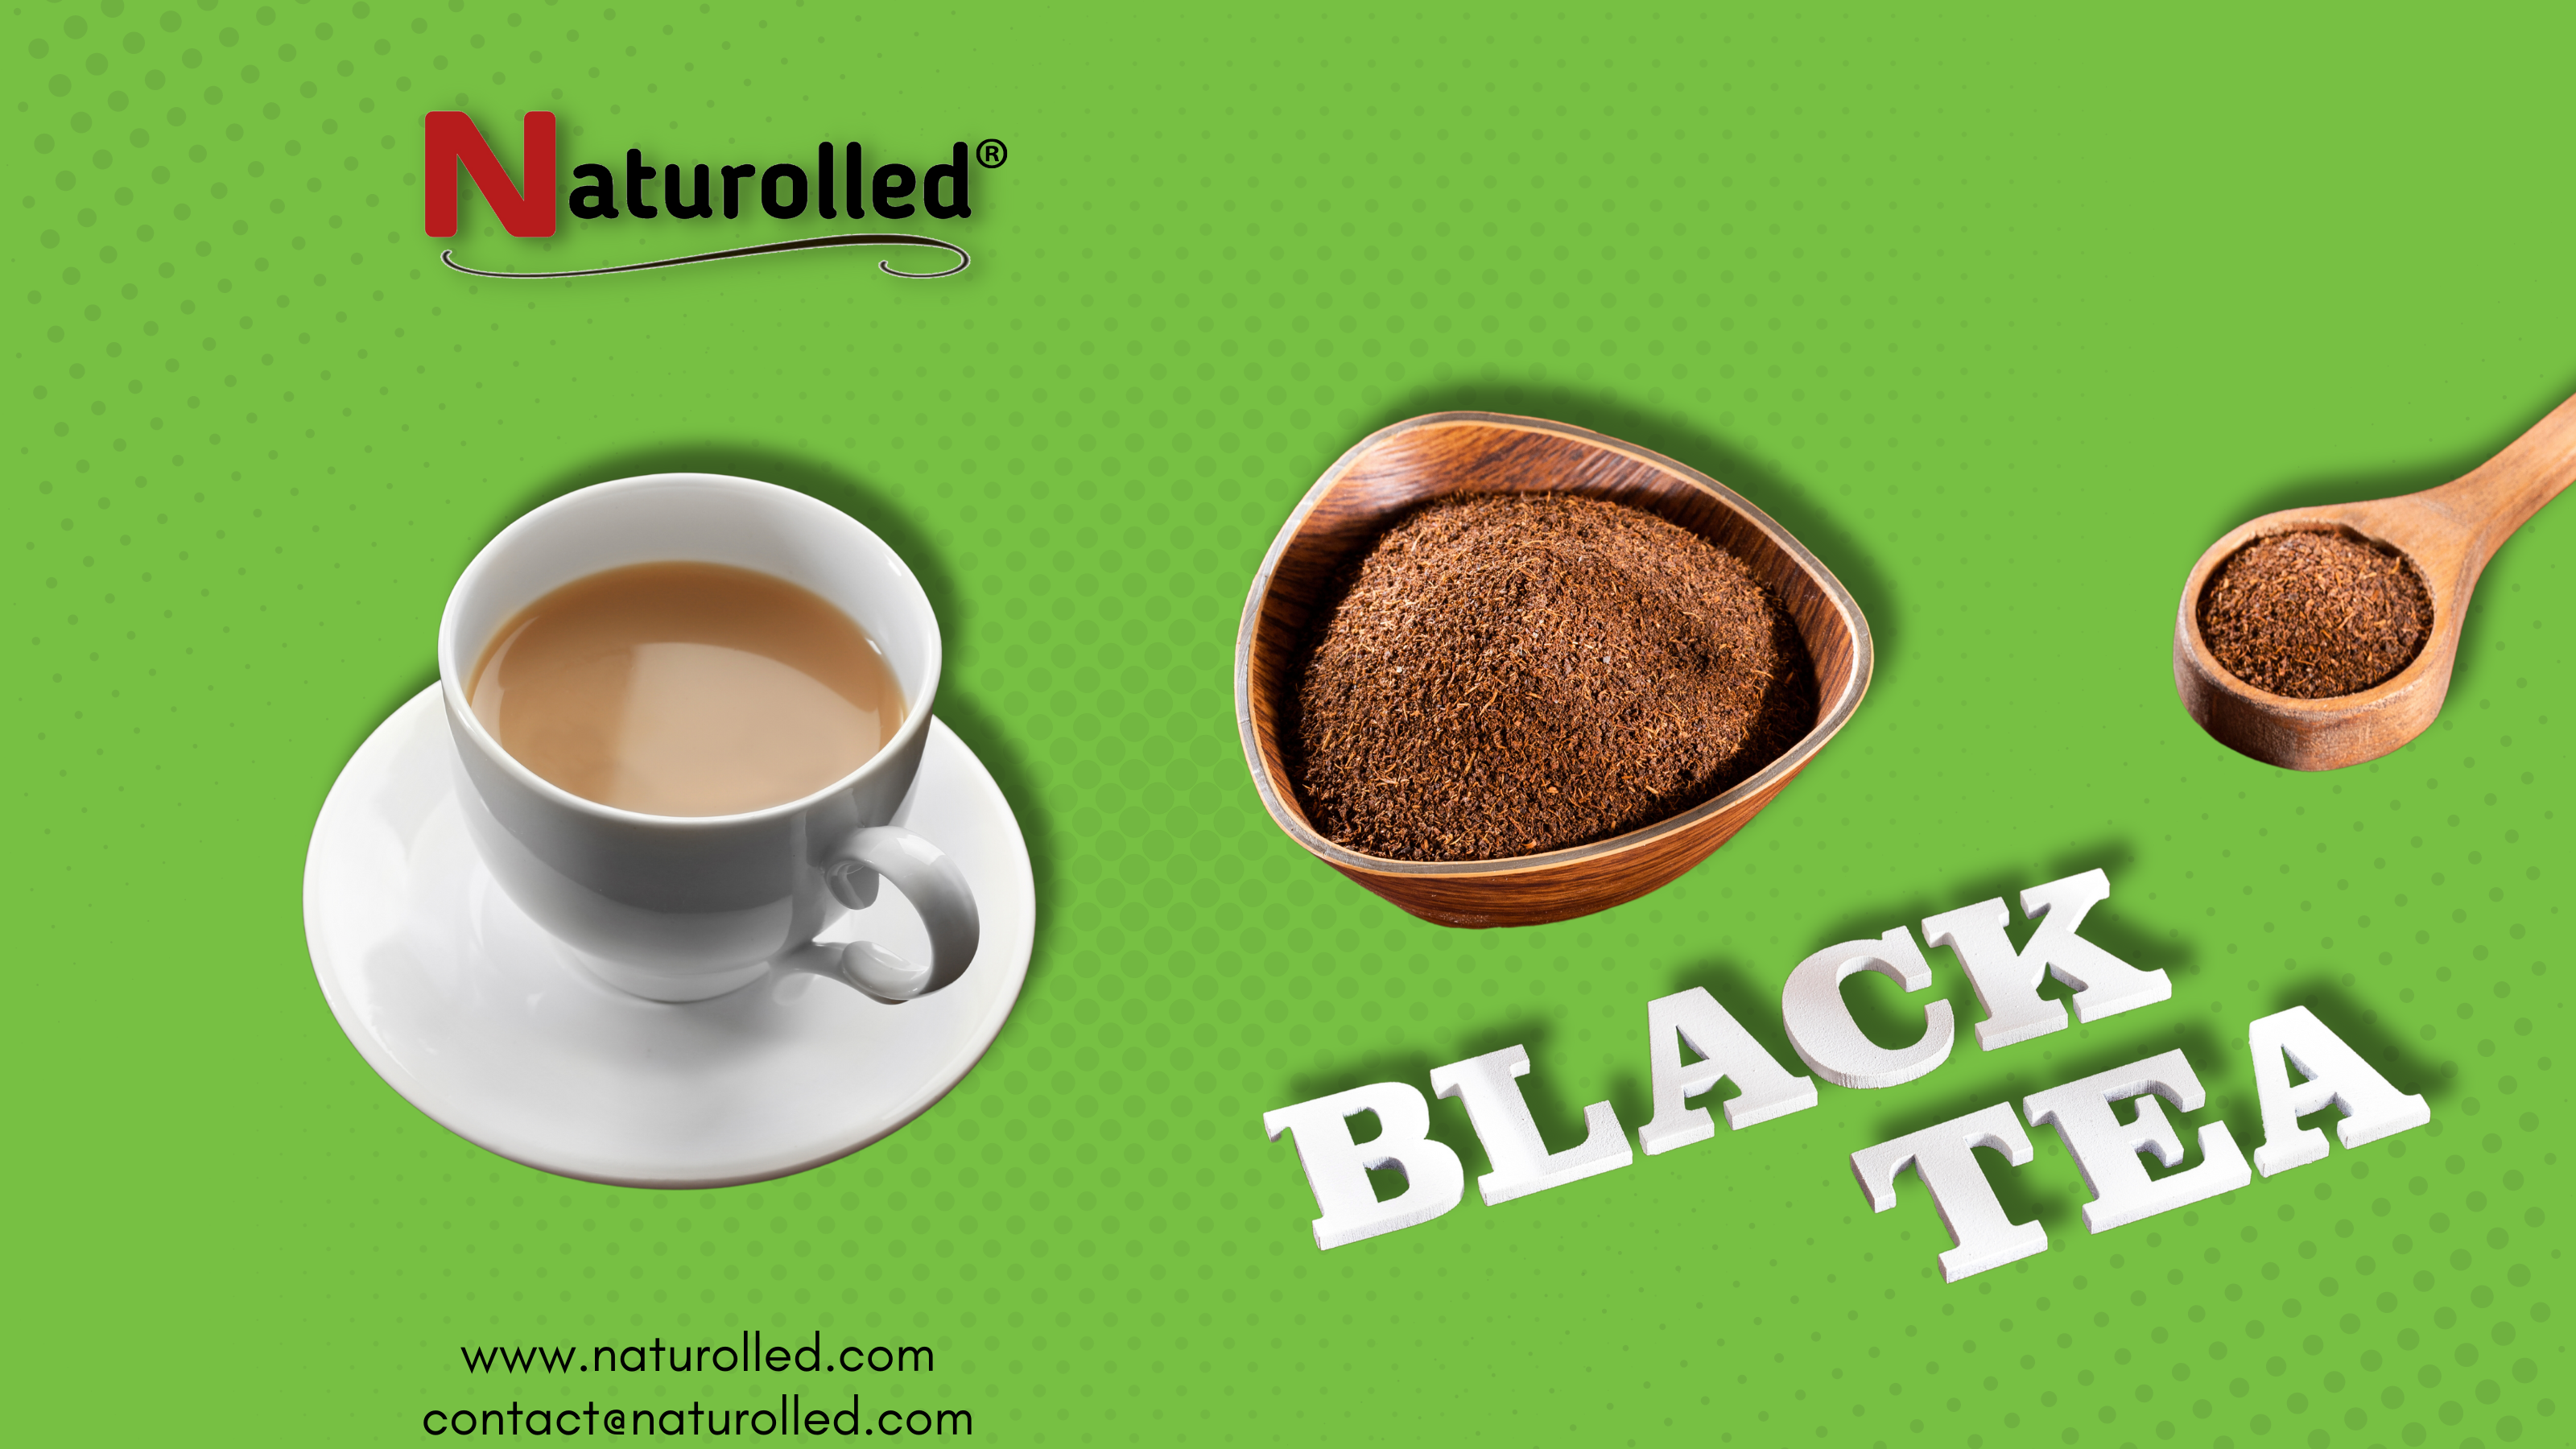 What Is Black Tea With Milk Called?